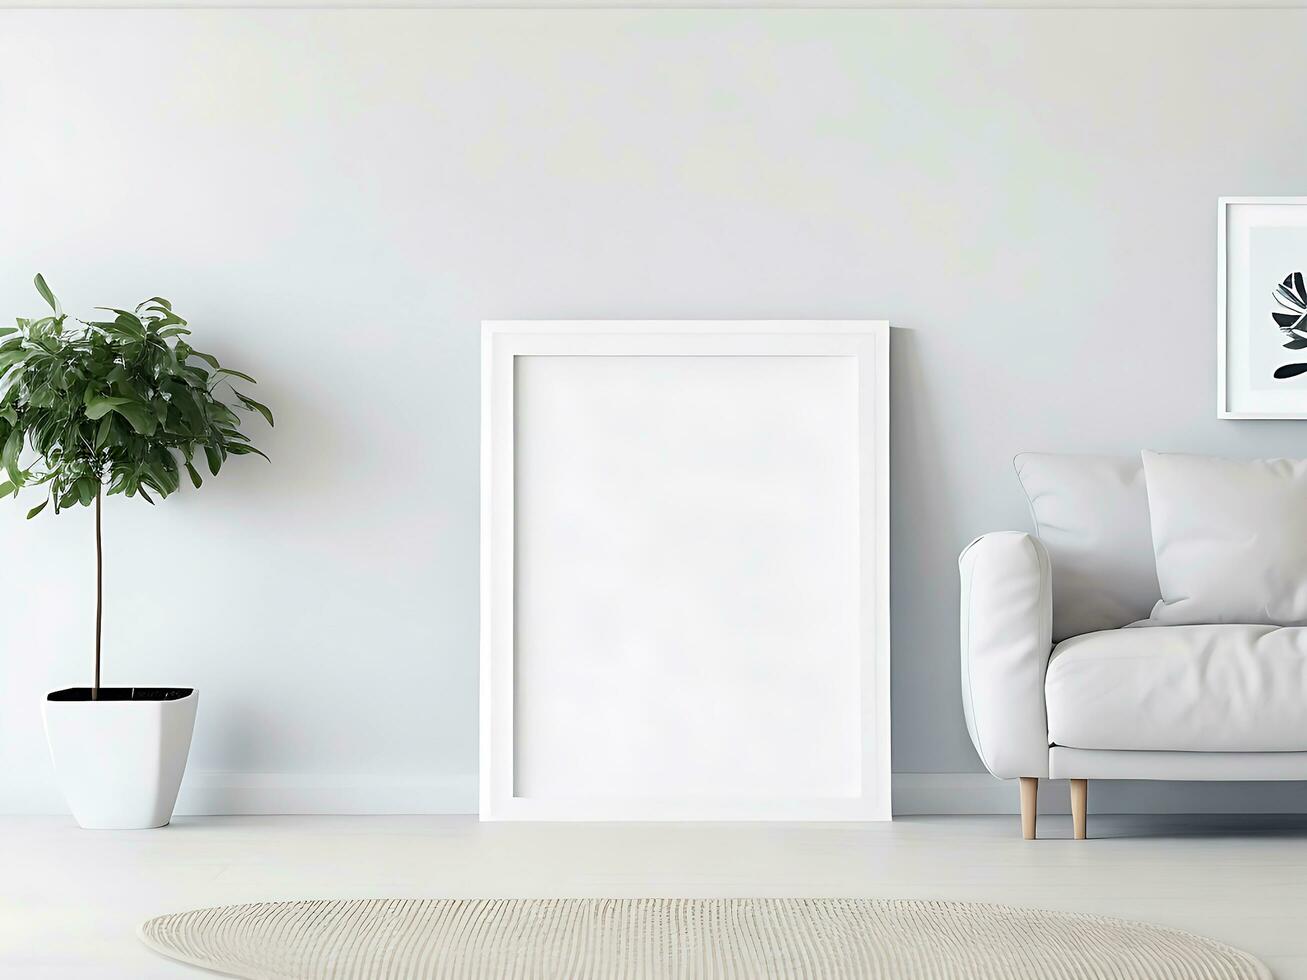 Blank picture frame mockup on white wall photo